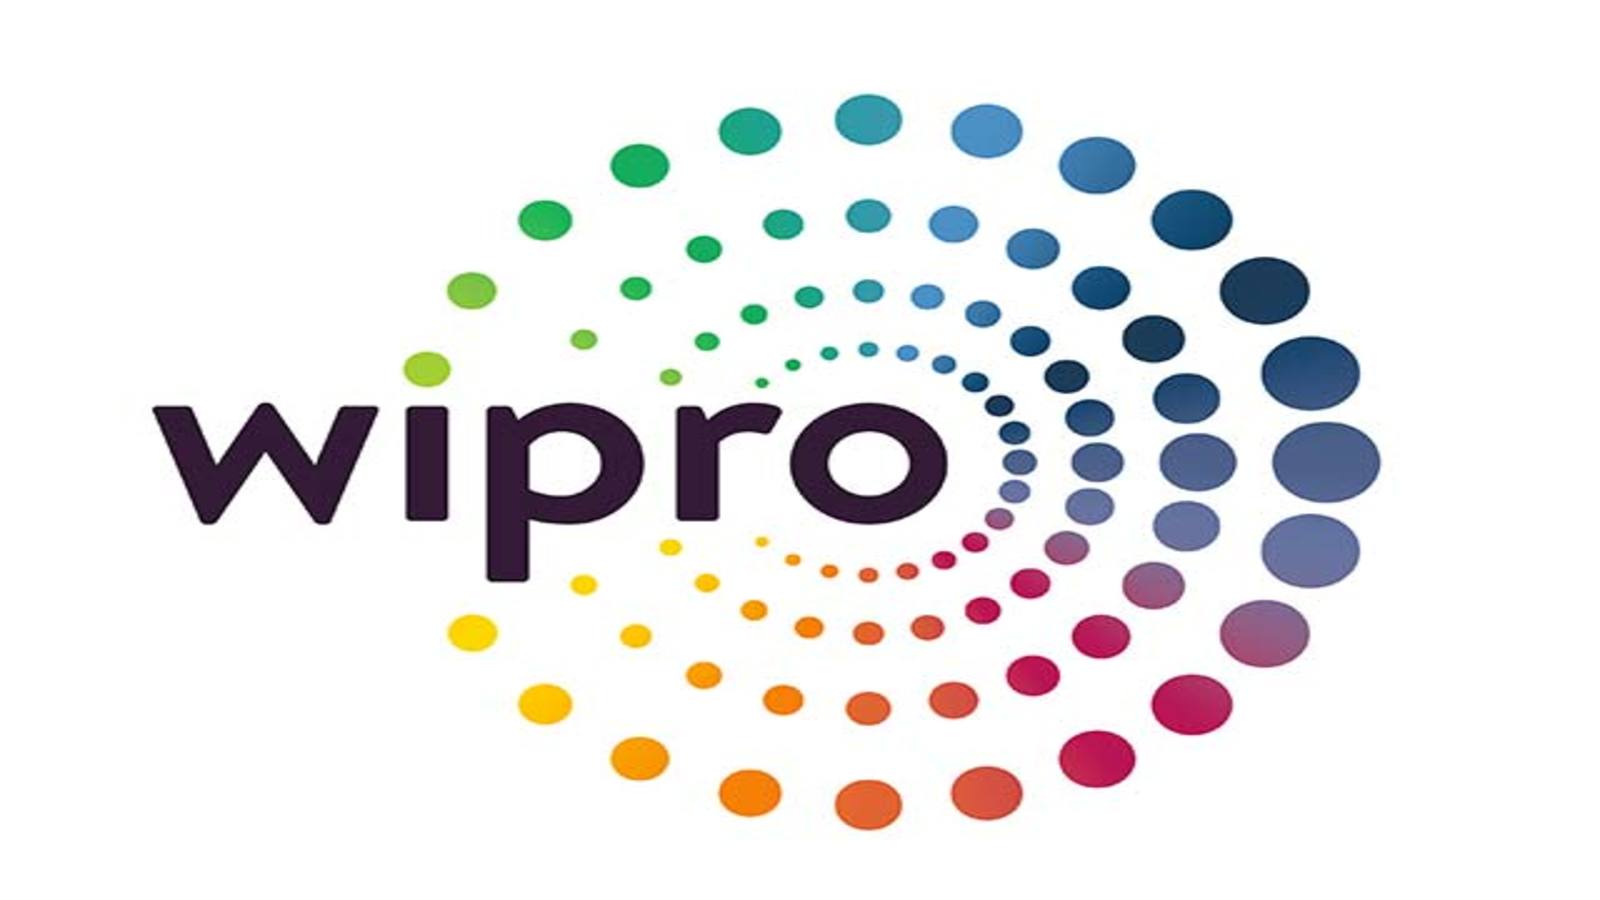 Wipro: Wipro bags its biggest order of over $1.5 billion from Alight Solutions Economic Times Video